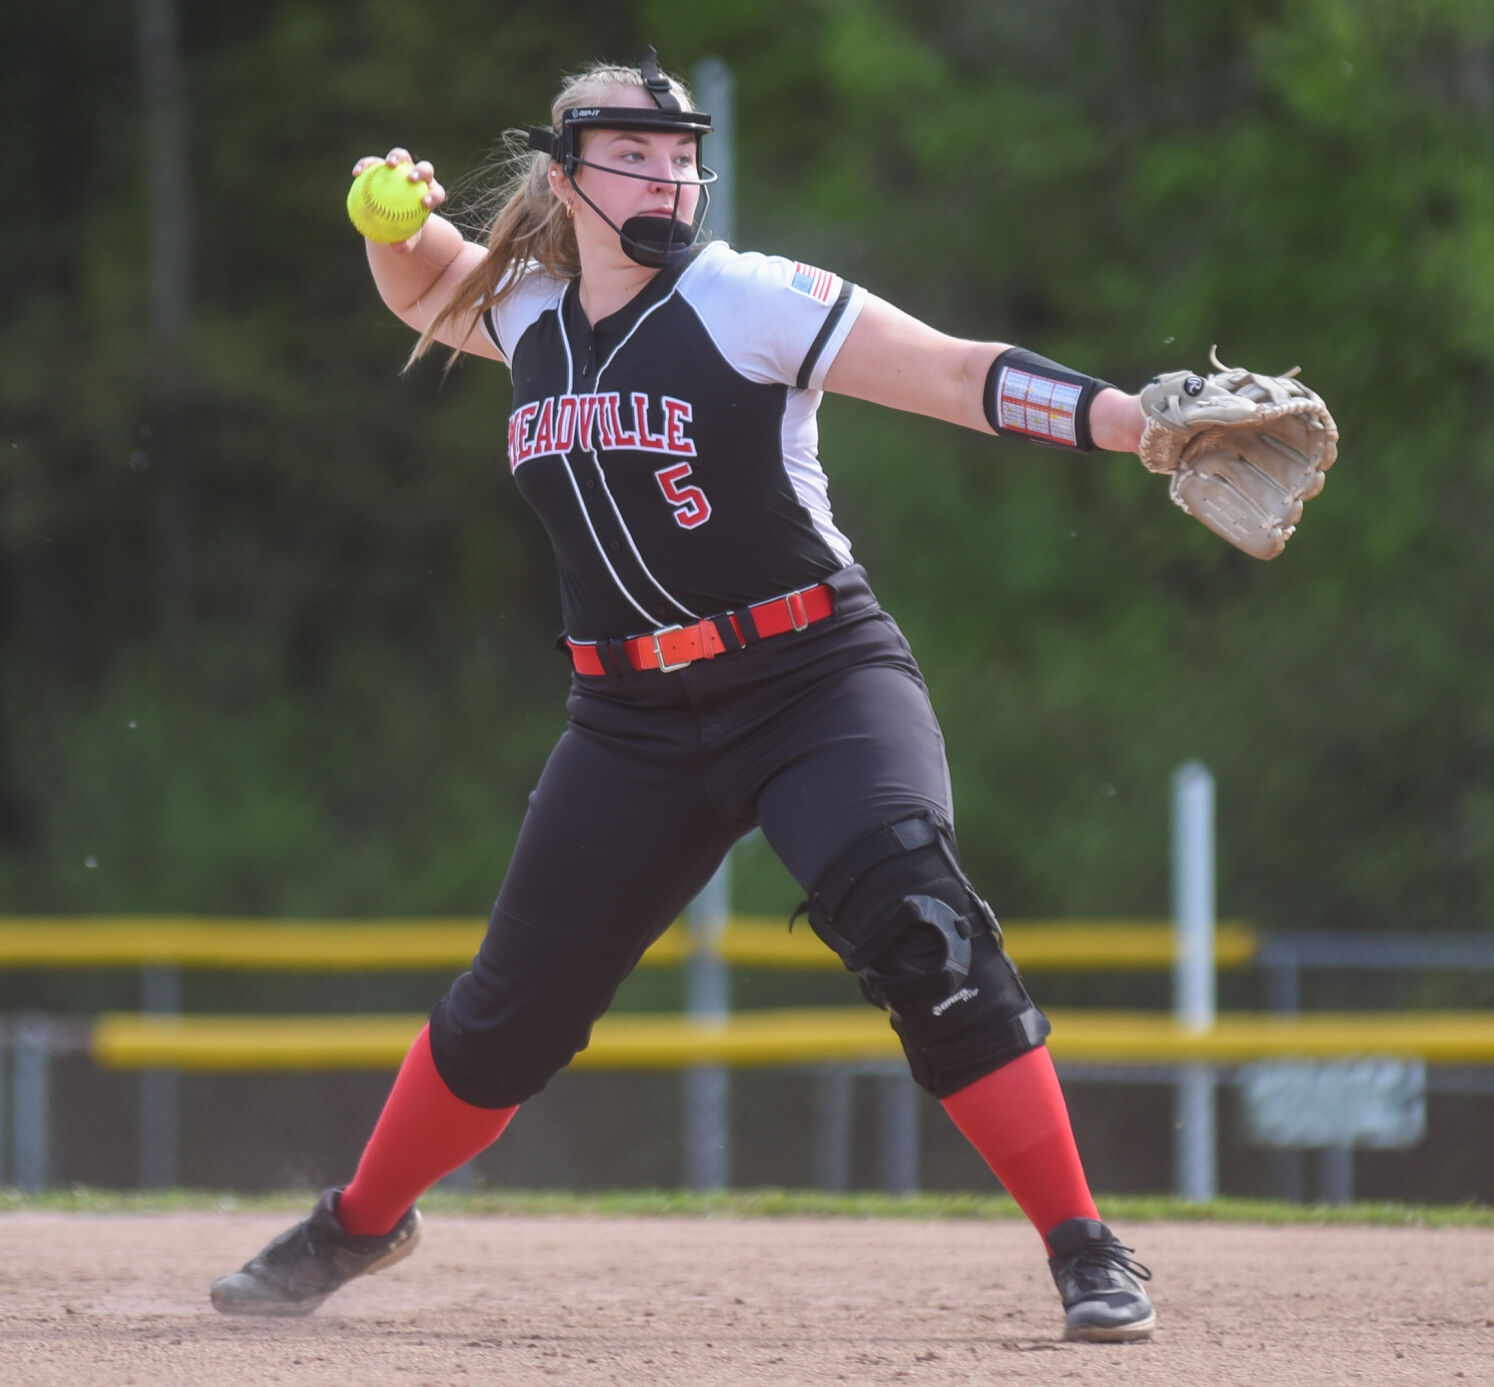 Meadville loses to Cathedral Prep despite early success